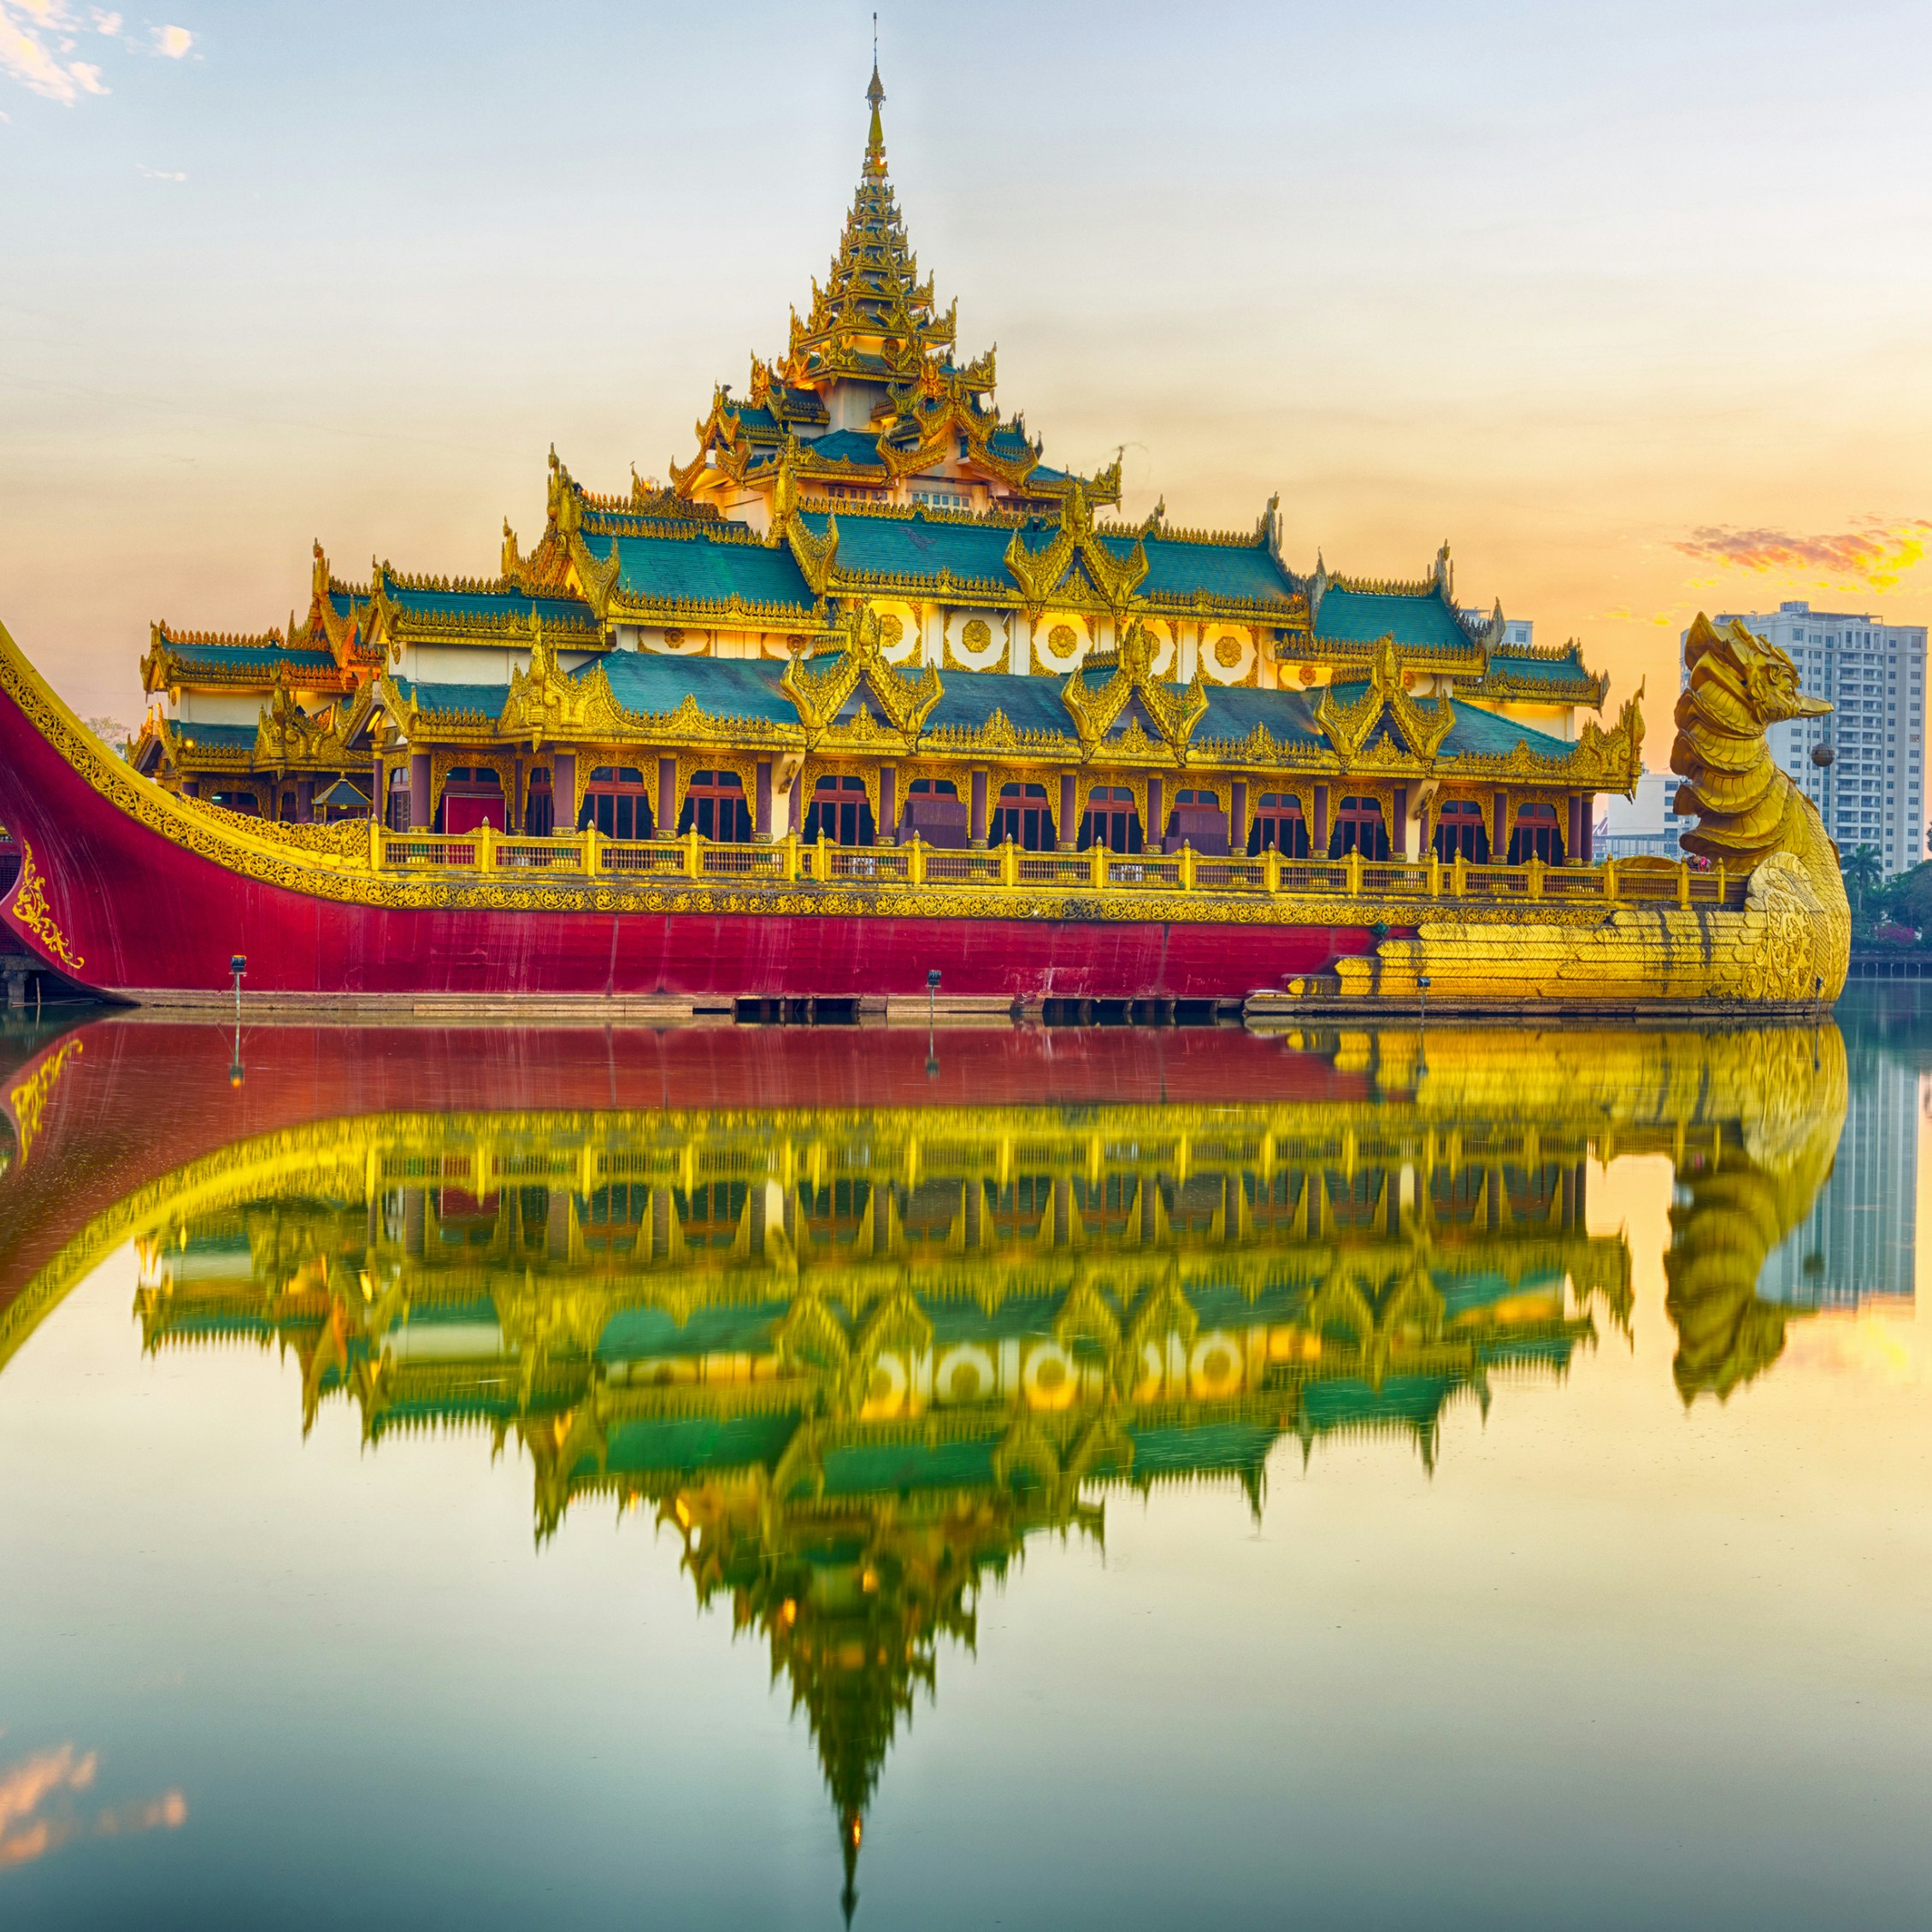 Golden Karaweik palace reflecting on Kandawgyi lake looks like an ancient royal barge. Sunset time. Yangon, Myanmar ; Shutterstock ID 420418678; Your name (First / Last): Laura Crawford; GL account no.: 65050; Netsuite department name: Online Editorial; Full Product or Project name including edition: Yangon images for city app POIs